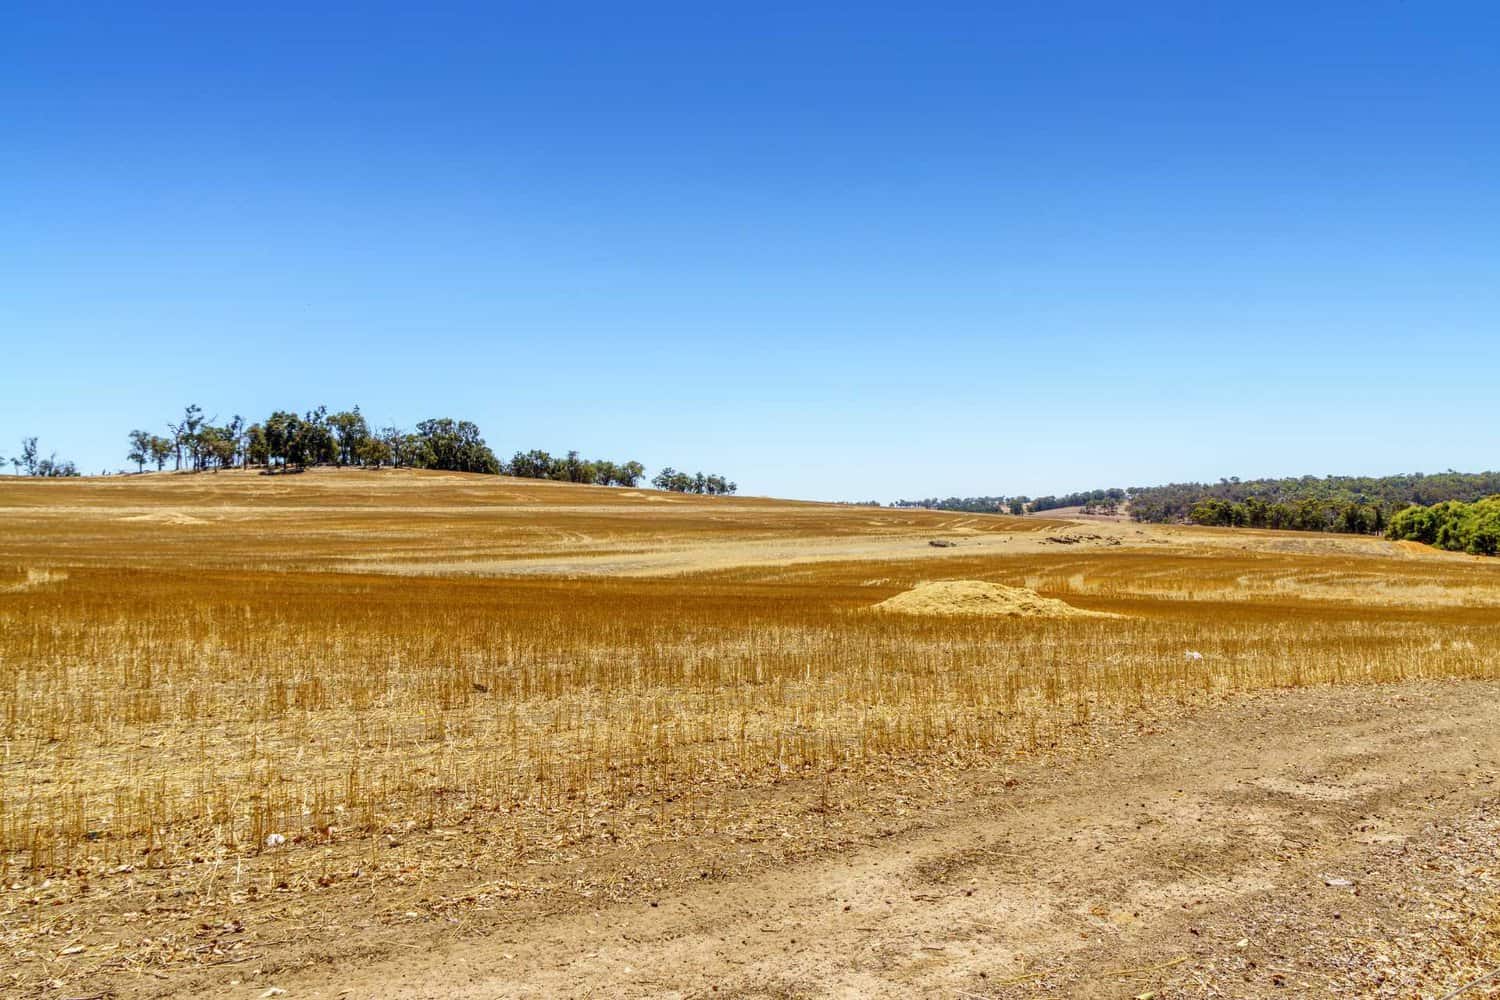 Expansive view of a harvested wheat field with undulating golden stubble under the vast Australian sky, and a cluster of trees adorning the distant hilltop. 